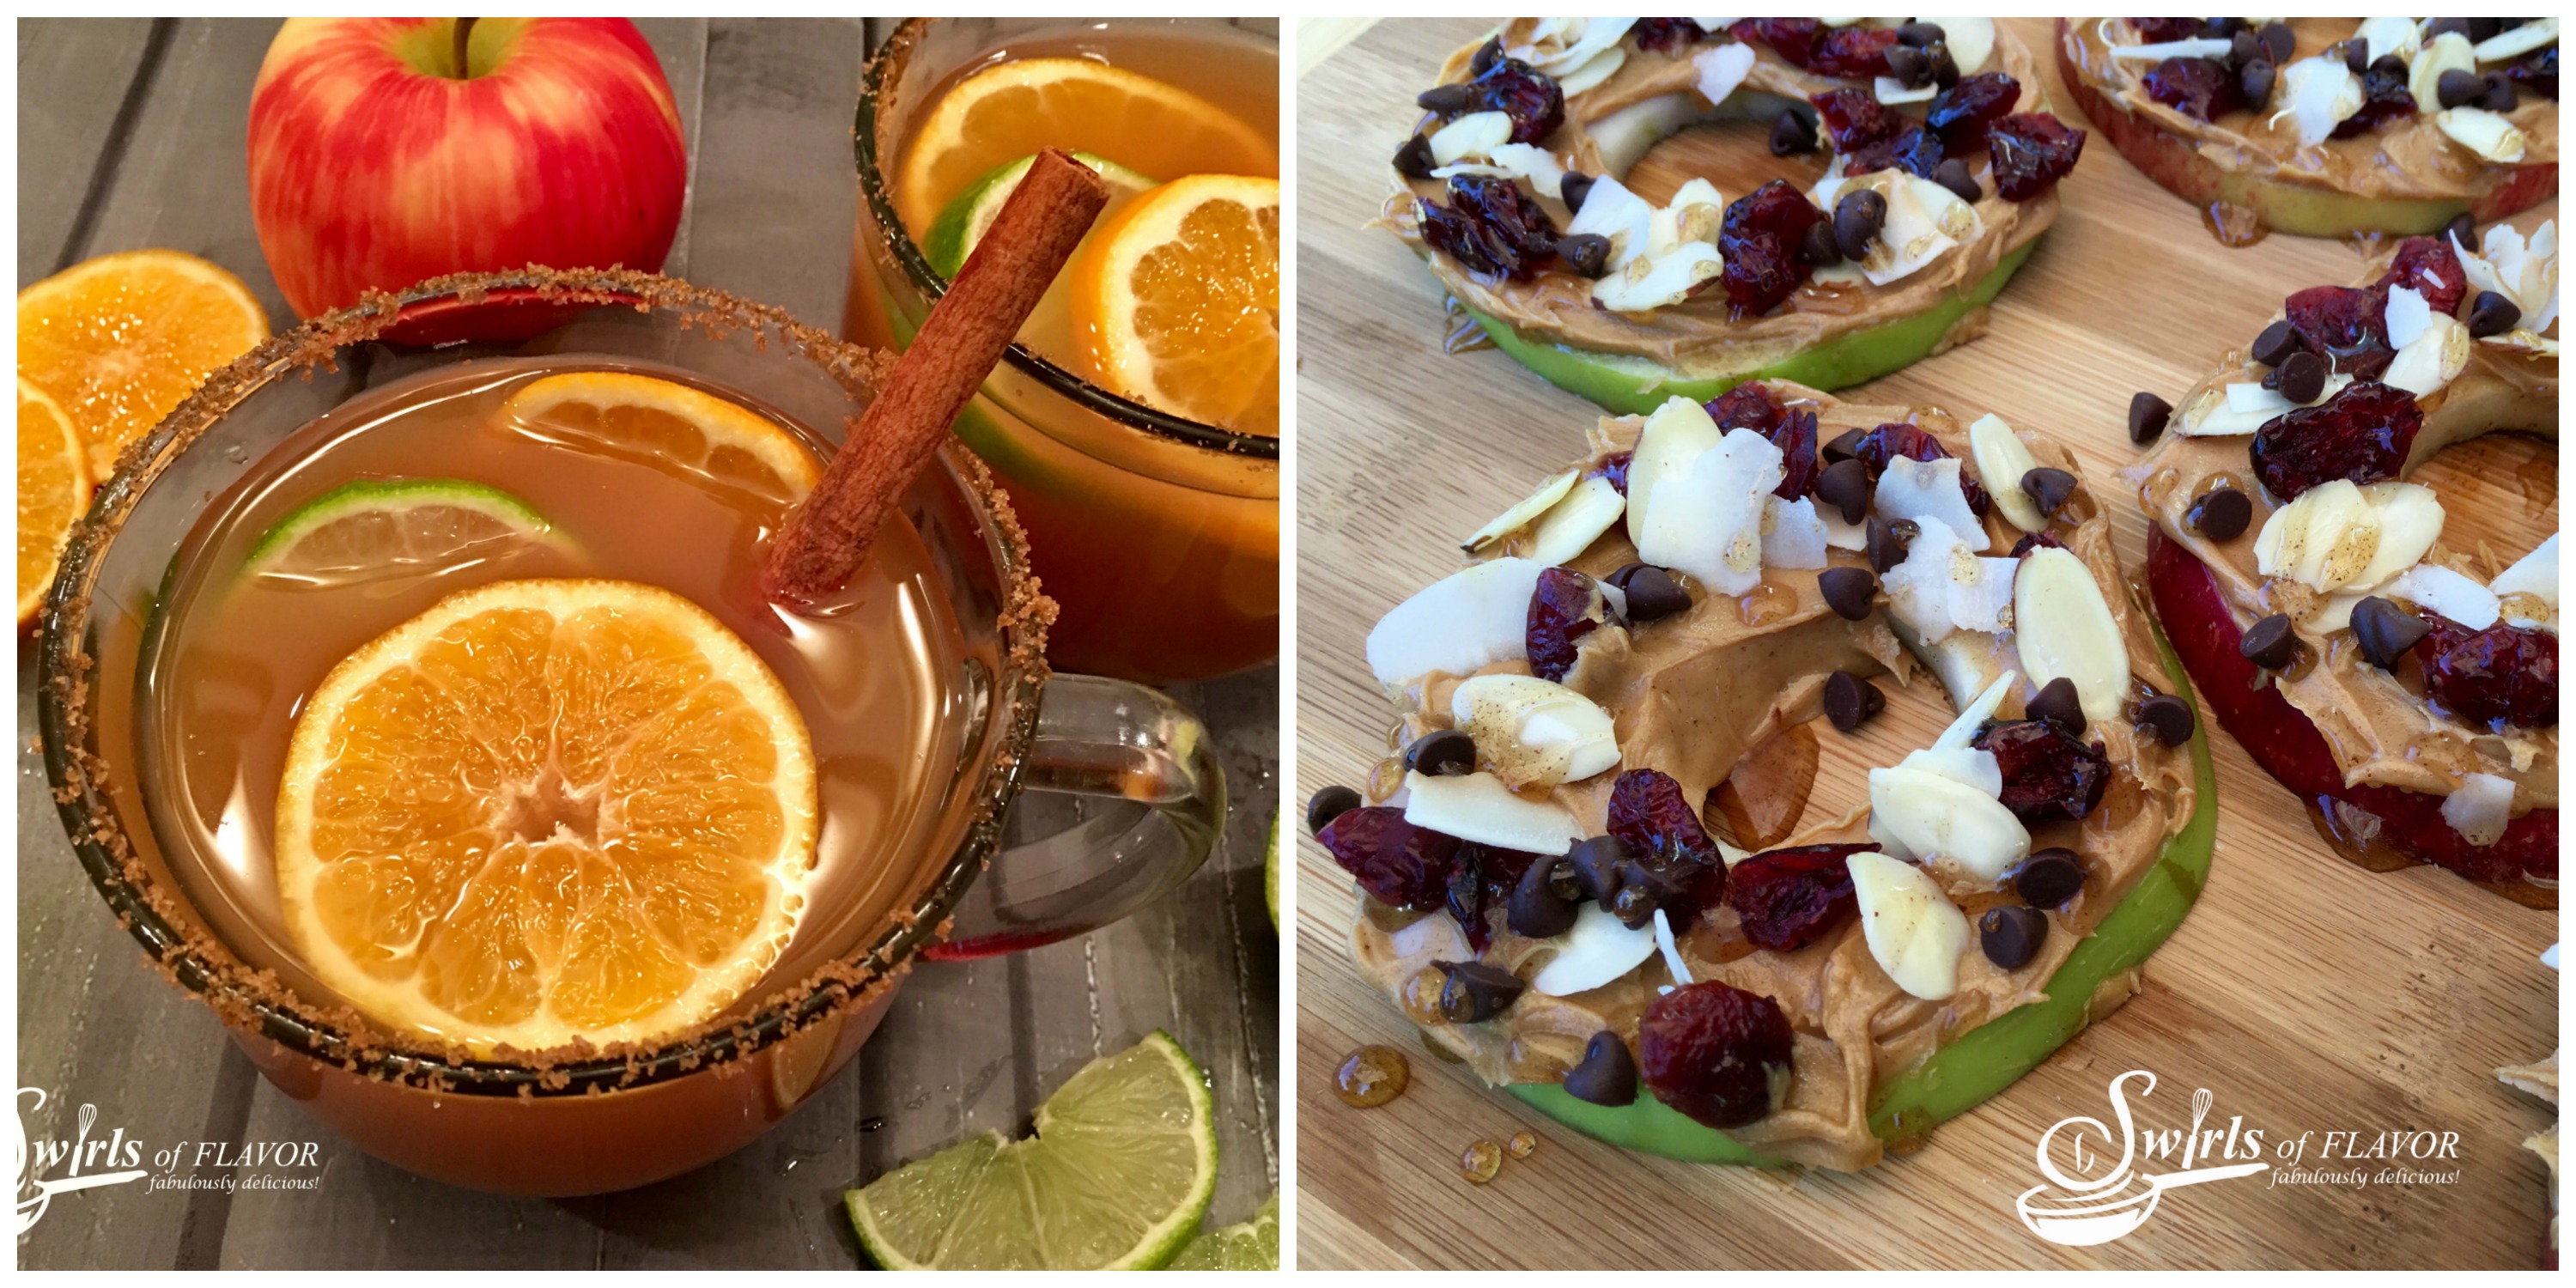 Mulled Apple Cider and Peanut Butter Apple Slices